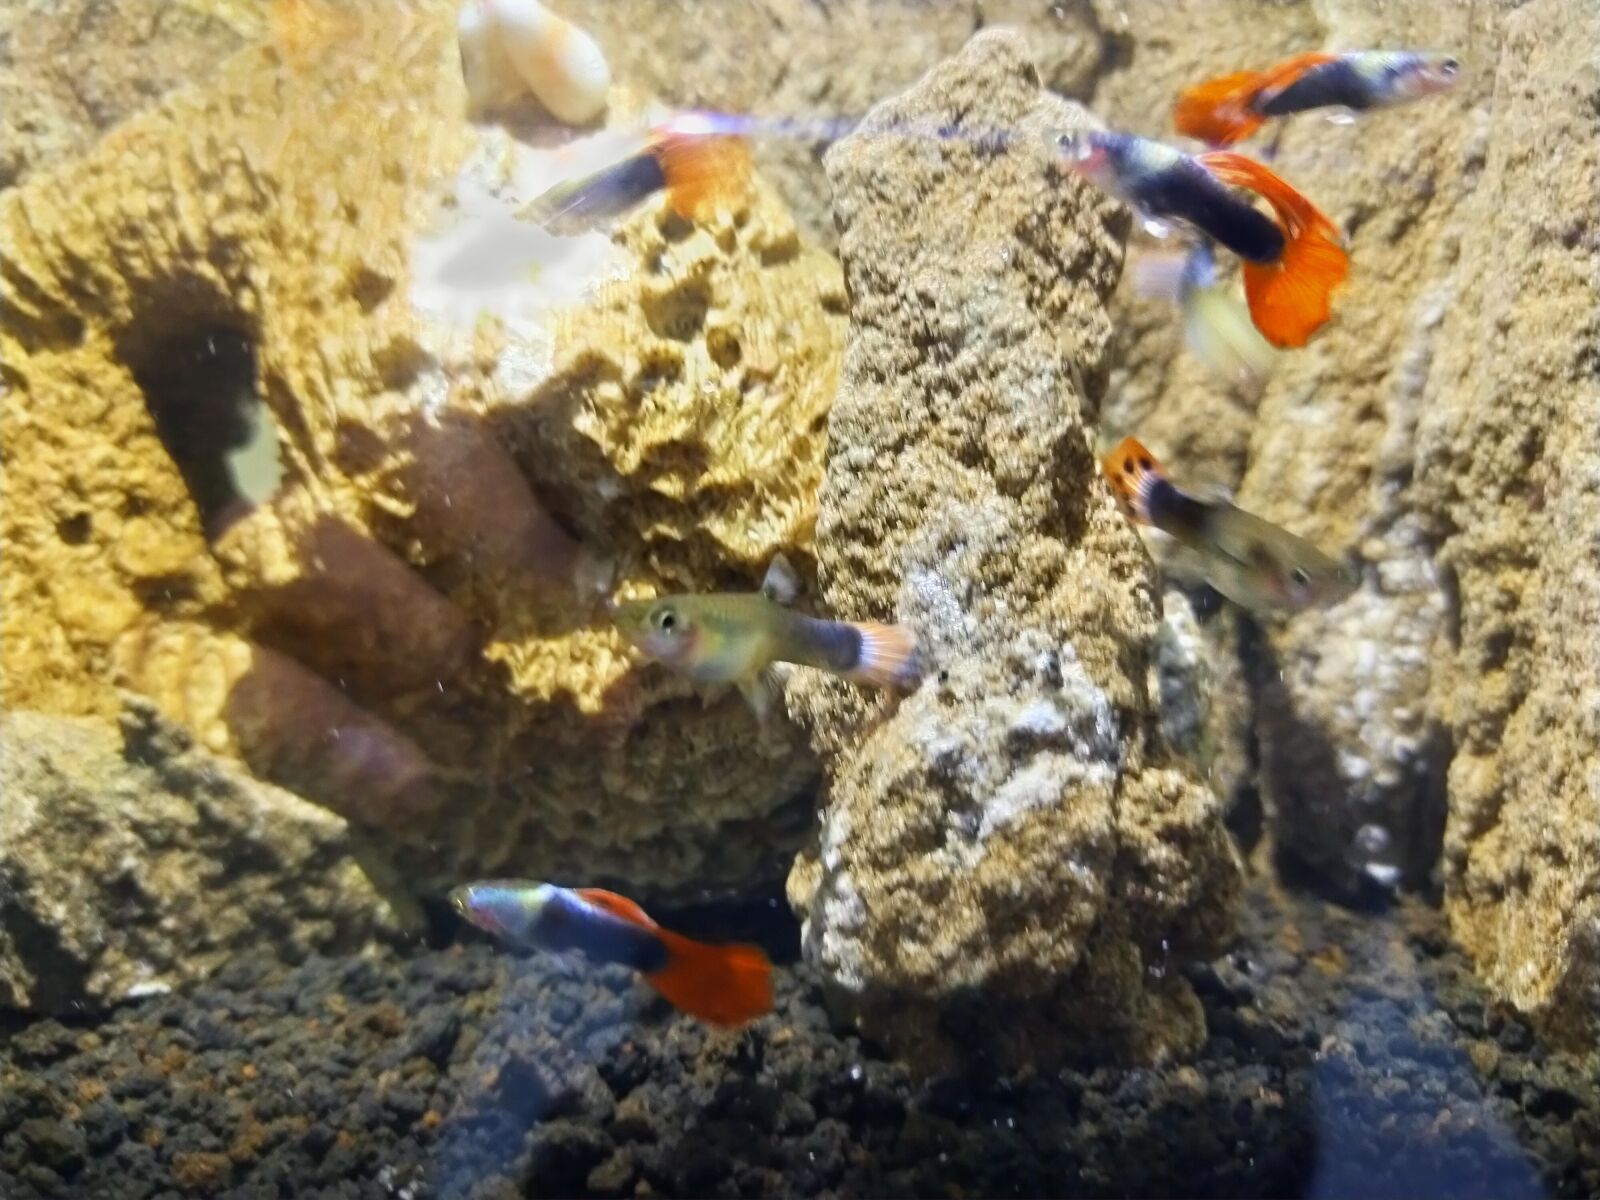 OPPO A9 2020 sample photo. Guppy, fish, aquascape photography